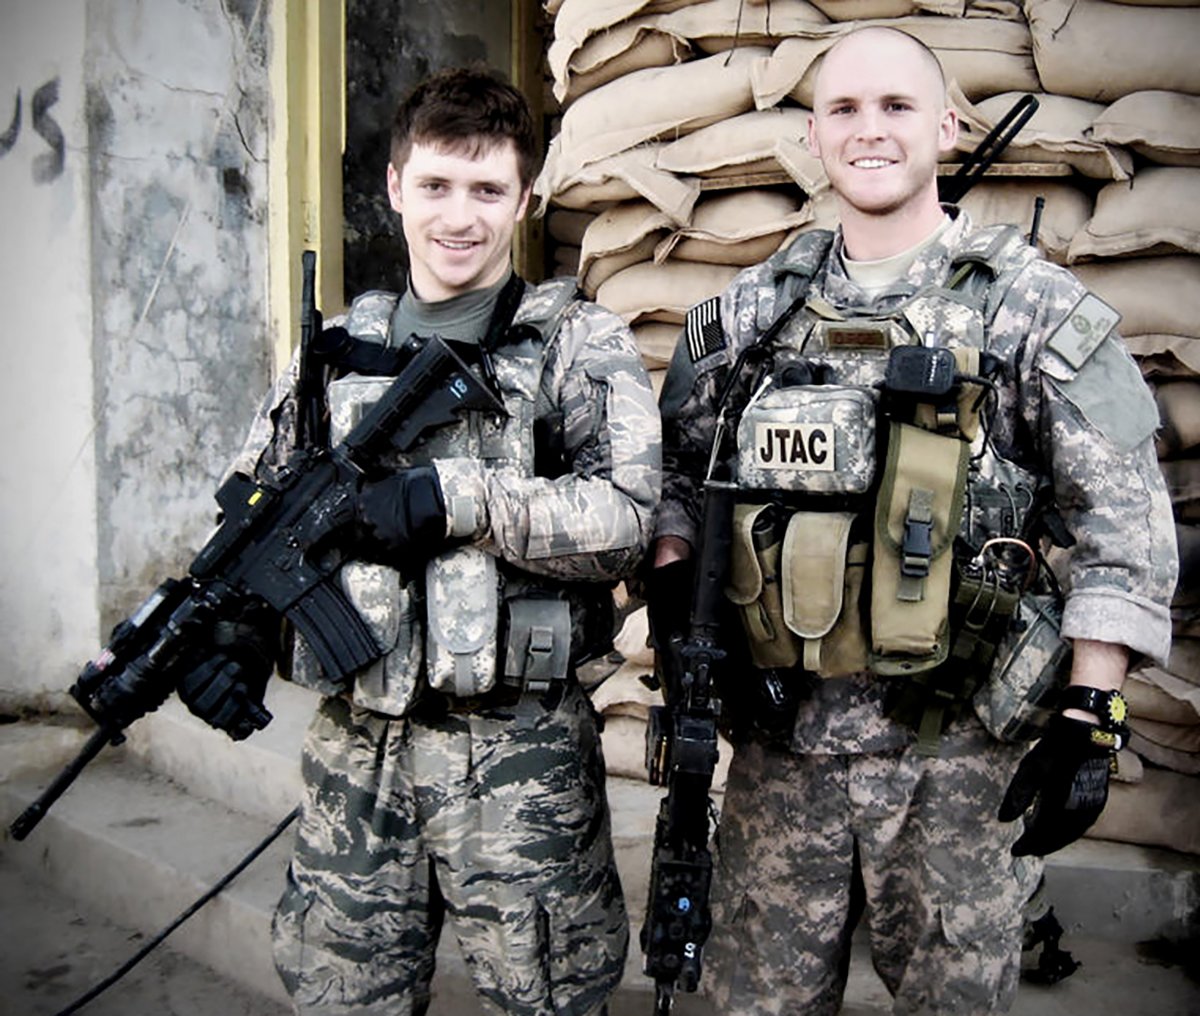 Senior Airmen Mike Malarsie and Bradley Smith pose for a photo during their Afghanistan deployment. An improvised explosive device attack mortally wounded Airman Smith and injured Airman Malarsie Jan. 3, in Afghanistan. The two tactical airlift control party Airmen were assigned to the 10th Air Support Operations Squadron at Fort Riley, Kan. (Courtesy photo)